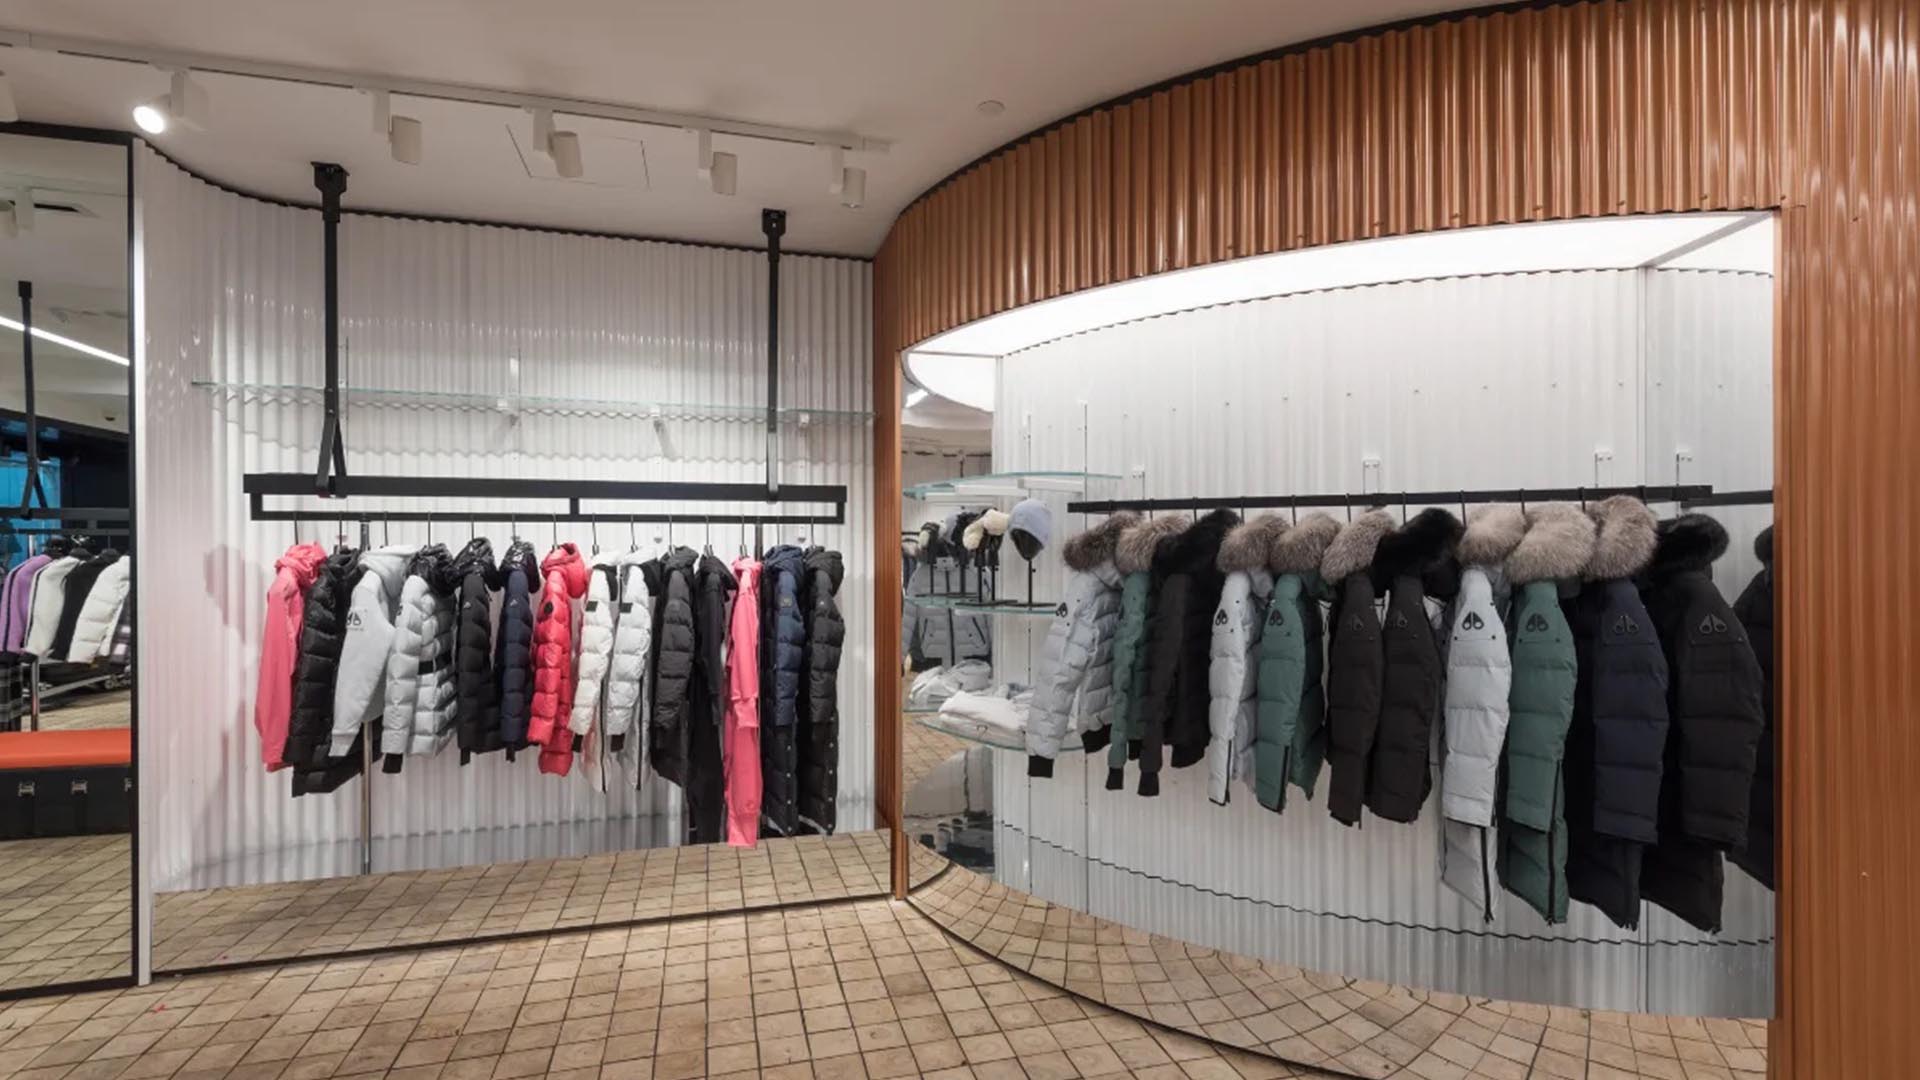 Curved metal wall in retail clothing outlet built by Piddi Deisgn